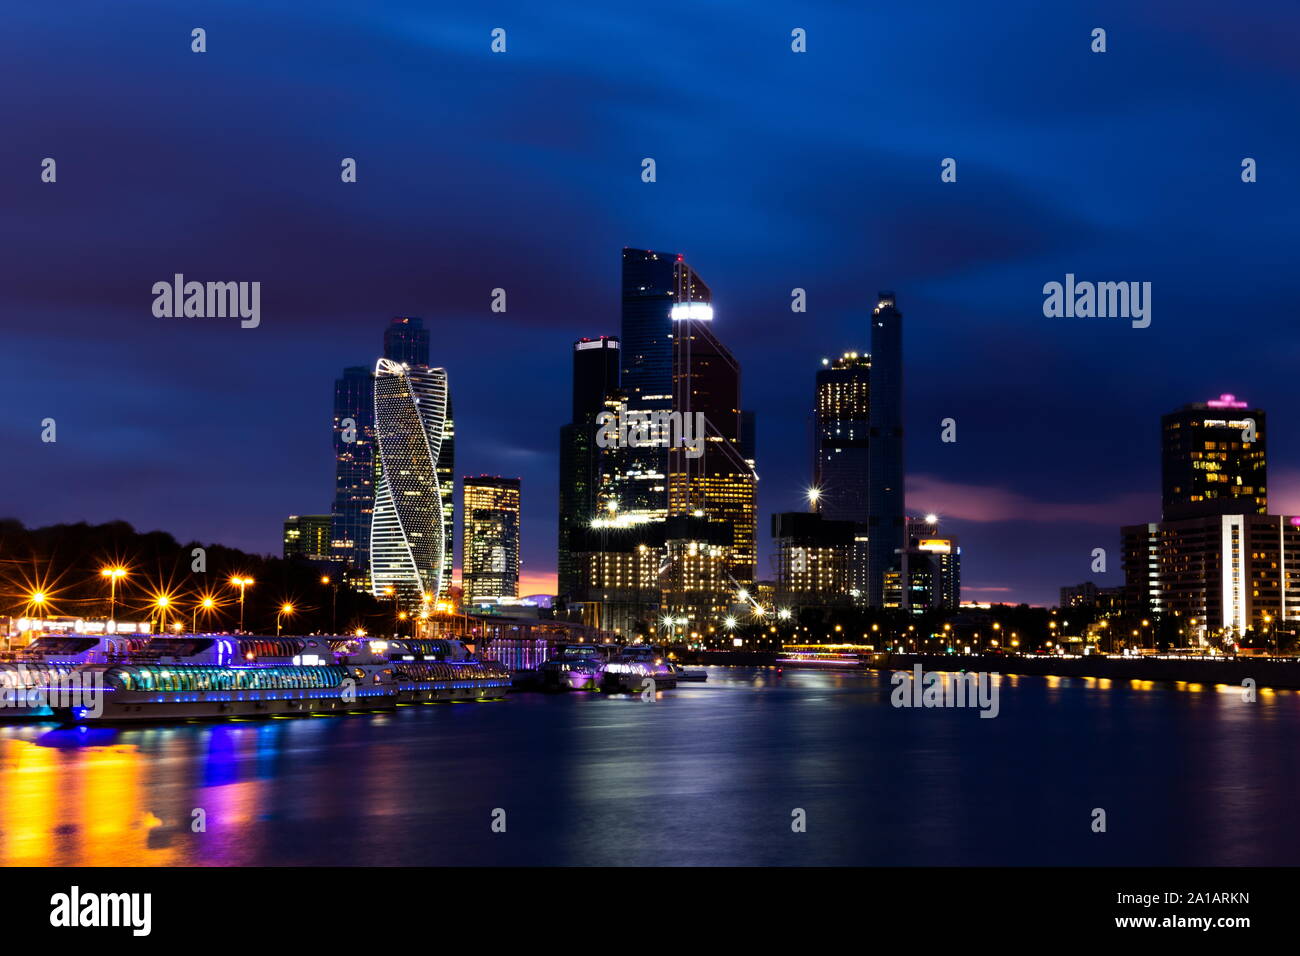 Moscow International Business Center. A high-rise in a city. Skyscrapers of Moscow. Stock Photo